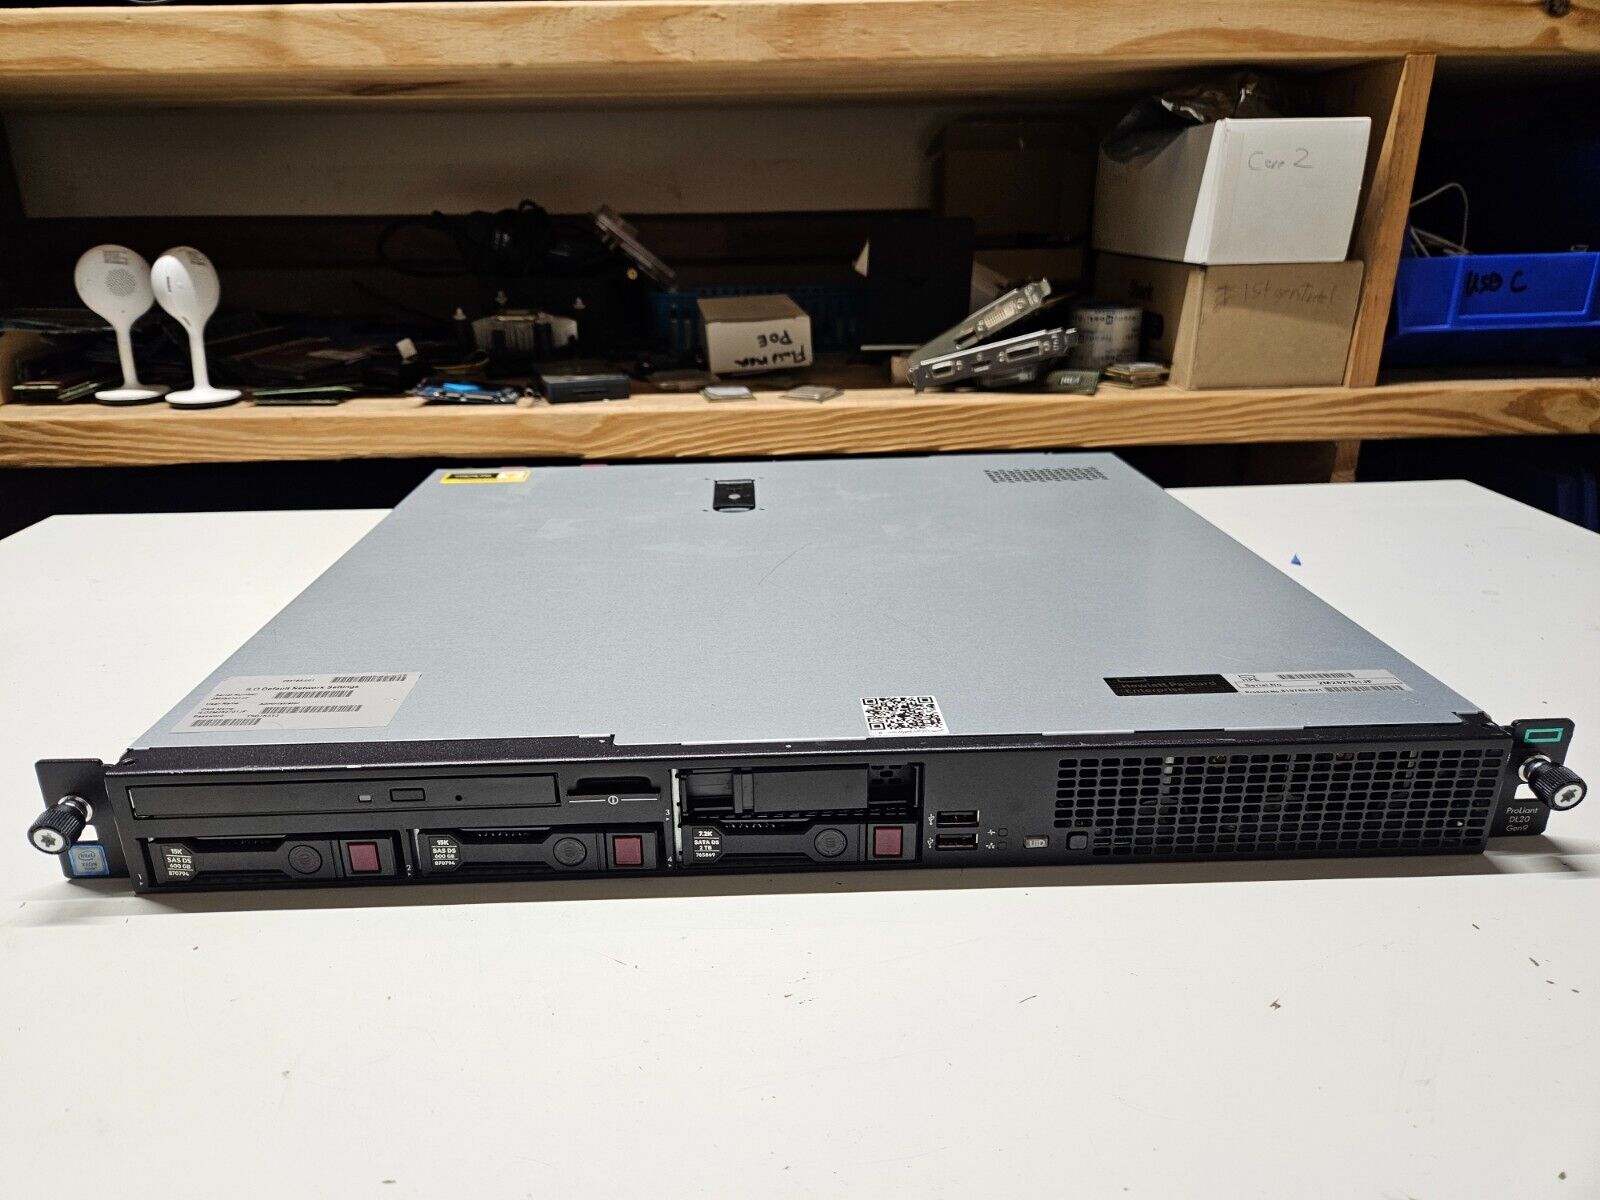 HPe 819786-B21 DL20 Gen9 4SFF CTO Chassis Xeon e3-1230v6 24GB Ram NO HDD NO OS